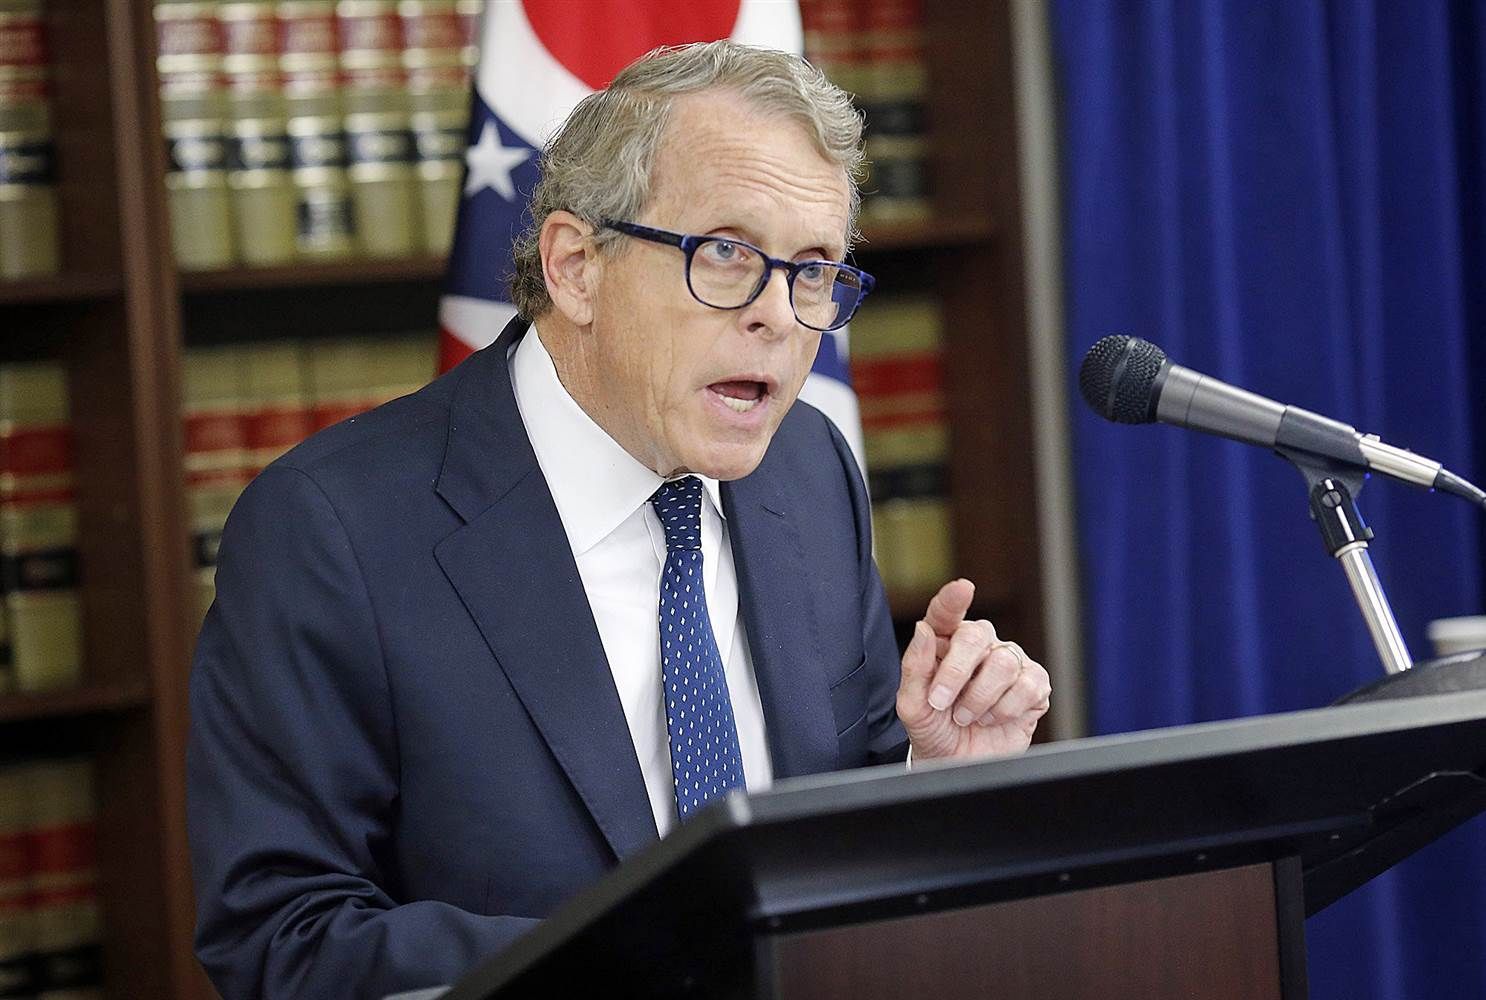 Ohio Attorney General Mike DeWine tells Congress about Ohio's opioid problems